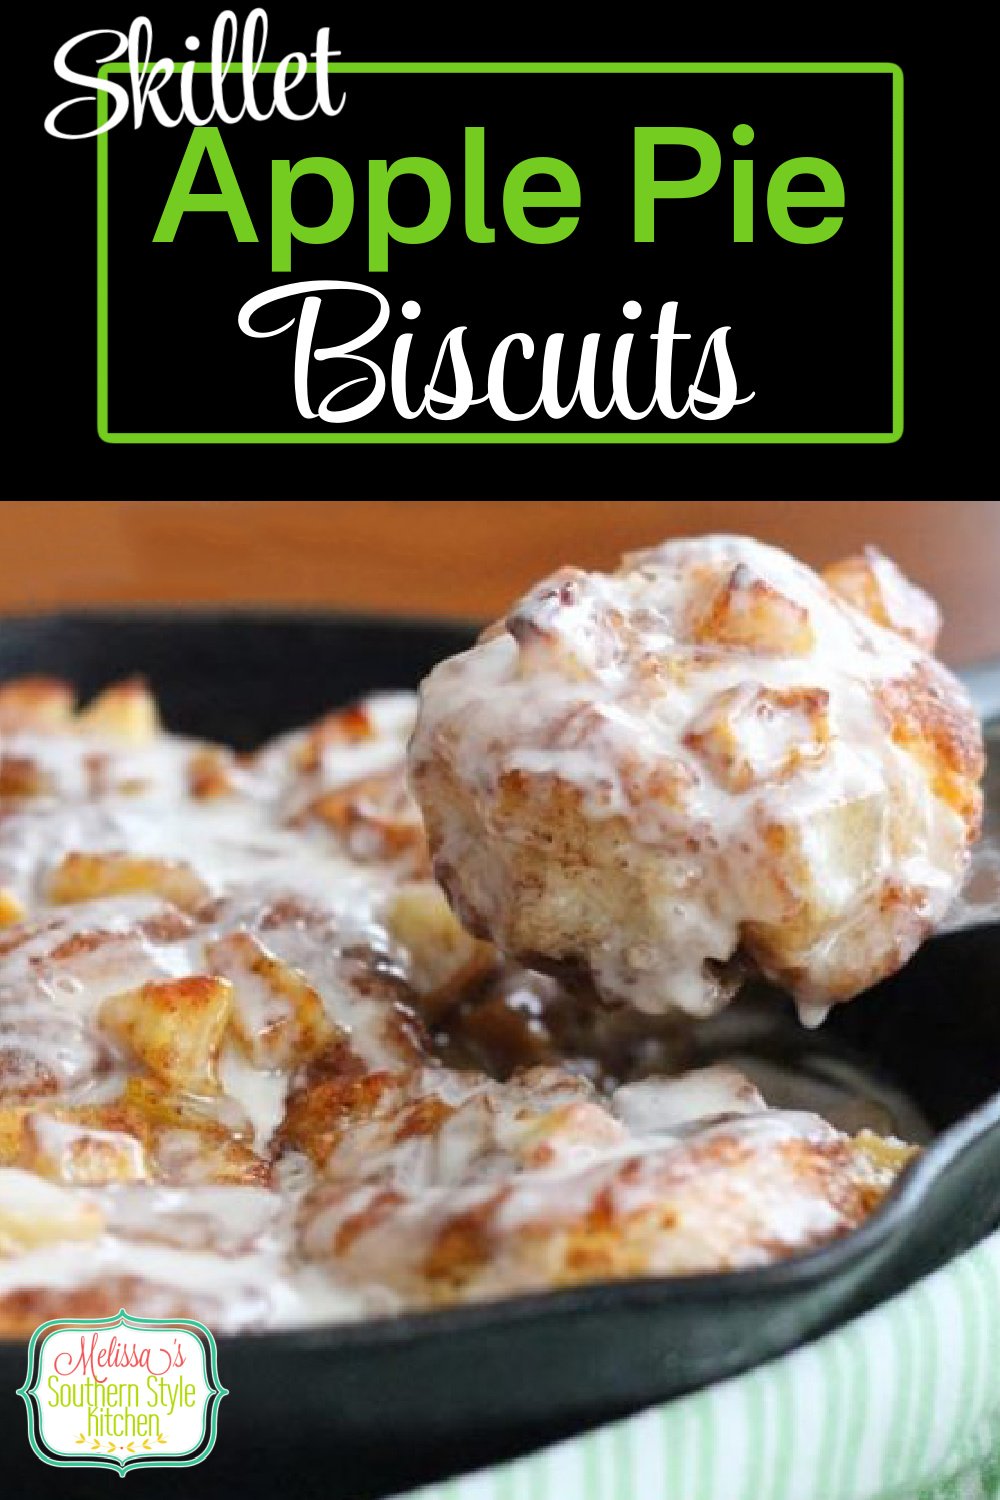 Breakfast or dessert these easy Apple Pie Biscuits are a fusion sweet treat that's impossible to resist #applepie #applepiebiscuits #biscuits #brunch #breakfast #recipes #sweets #dessertfoodrecipes #desserts #southernfood #southernrecipes #holidaybrunch #apples #pie #holidayrecipes #fallbaking via @melissasssk